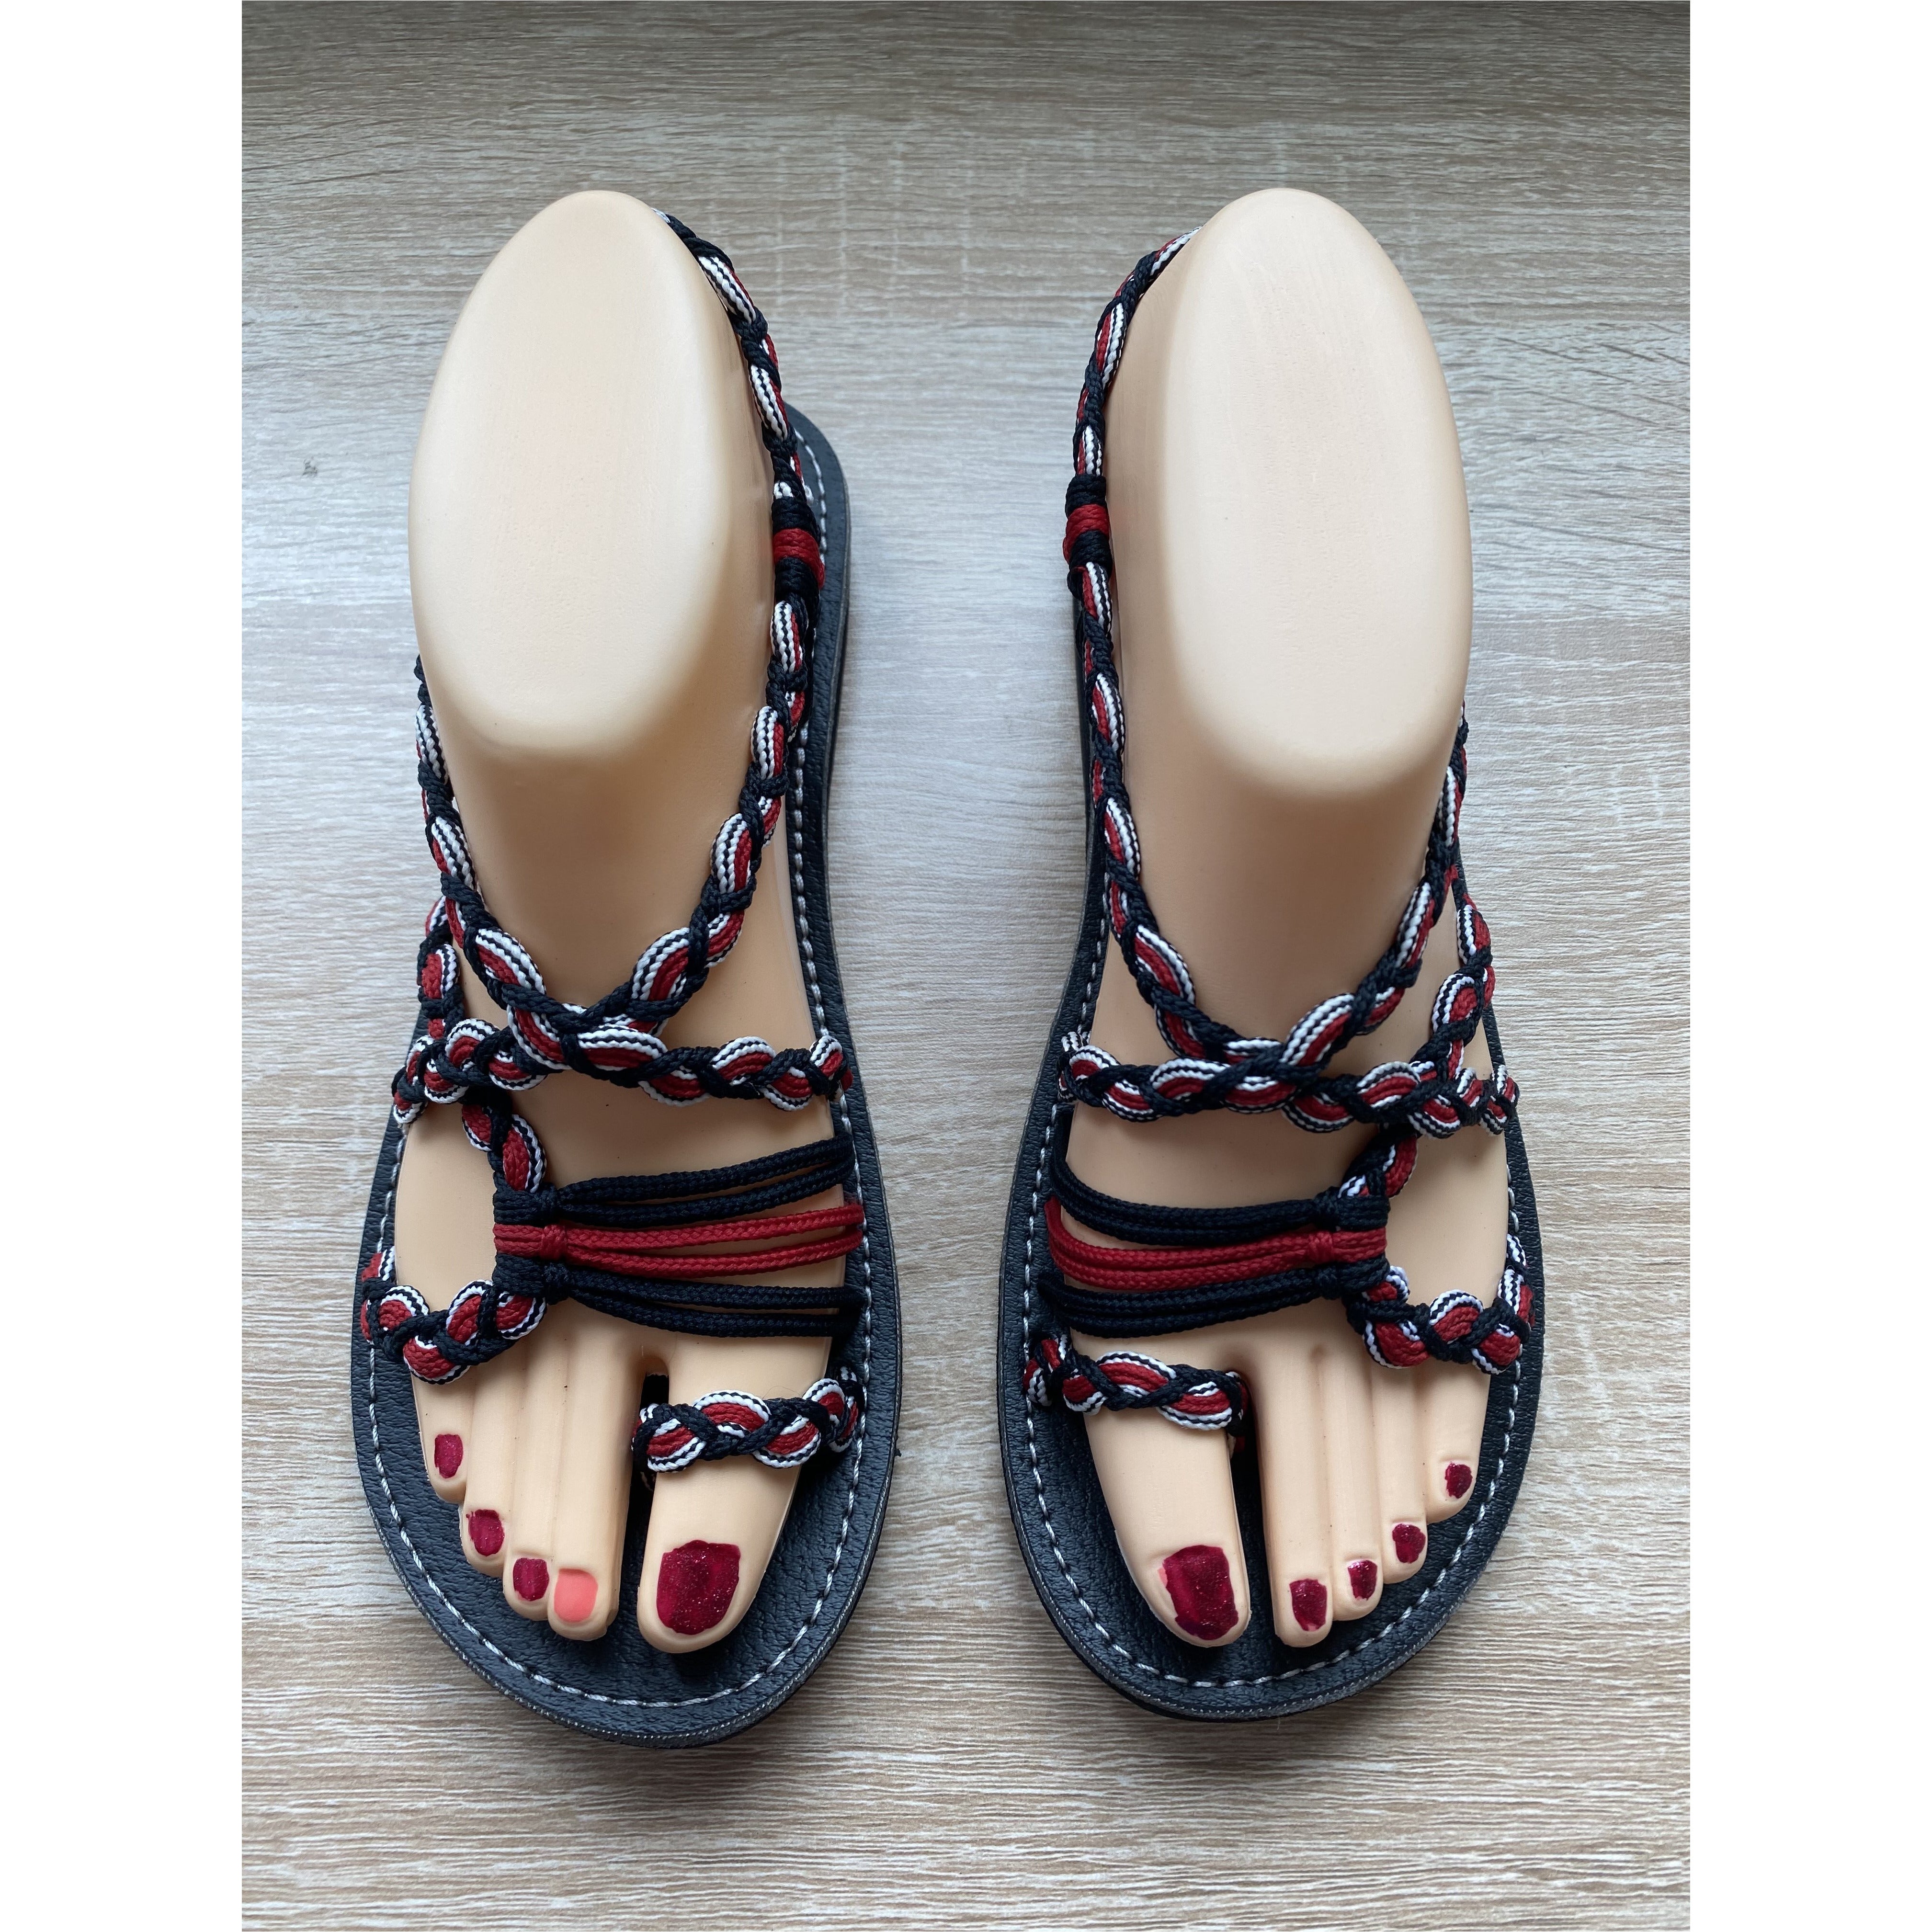 Shoes - Braided Sandals BRW